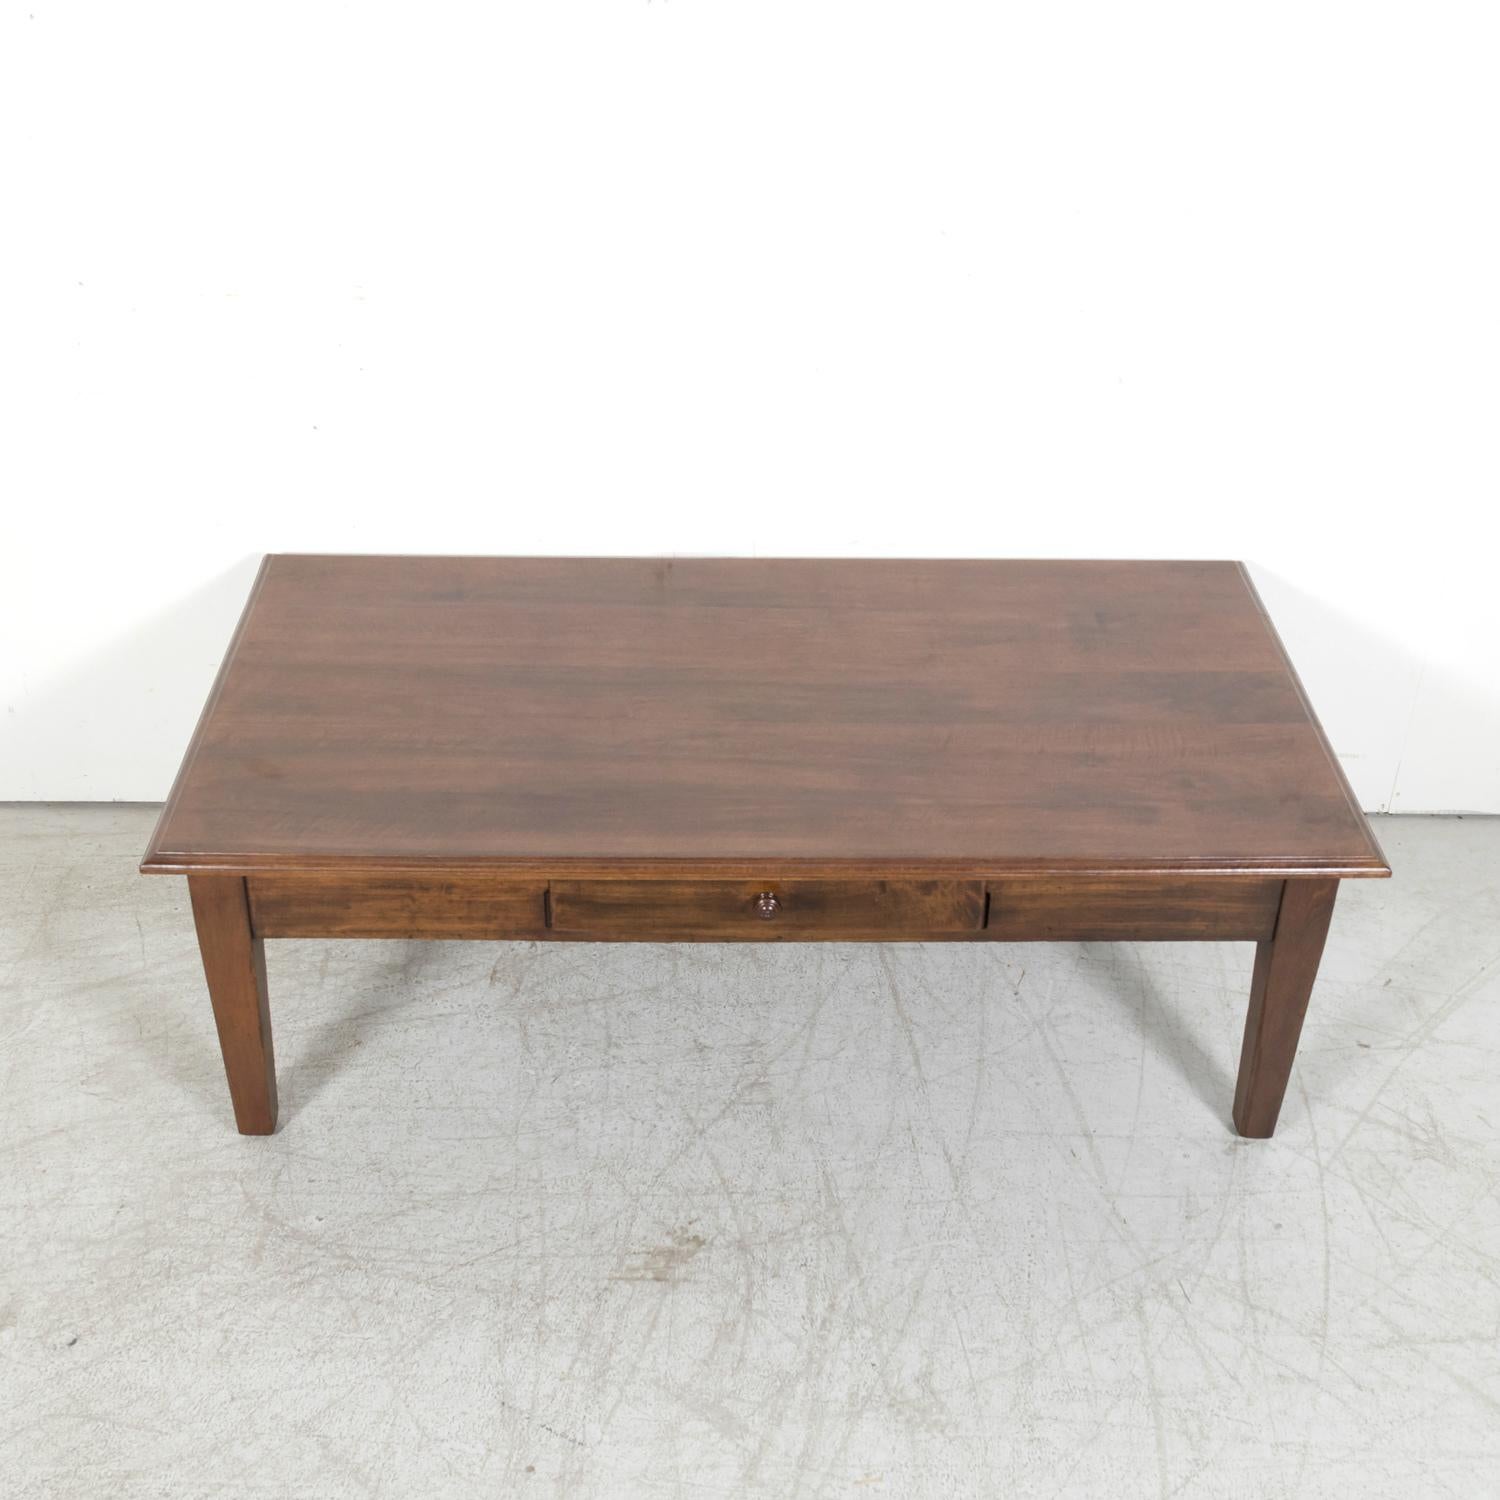 Large 19th Century Rustic French Country Solid Walnut Coffee Table with Drawer For Sale 1